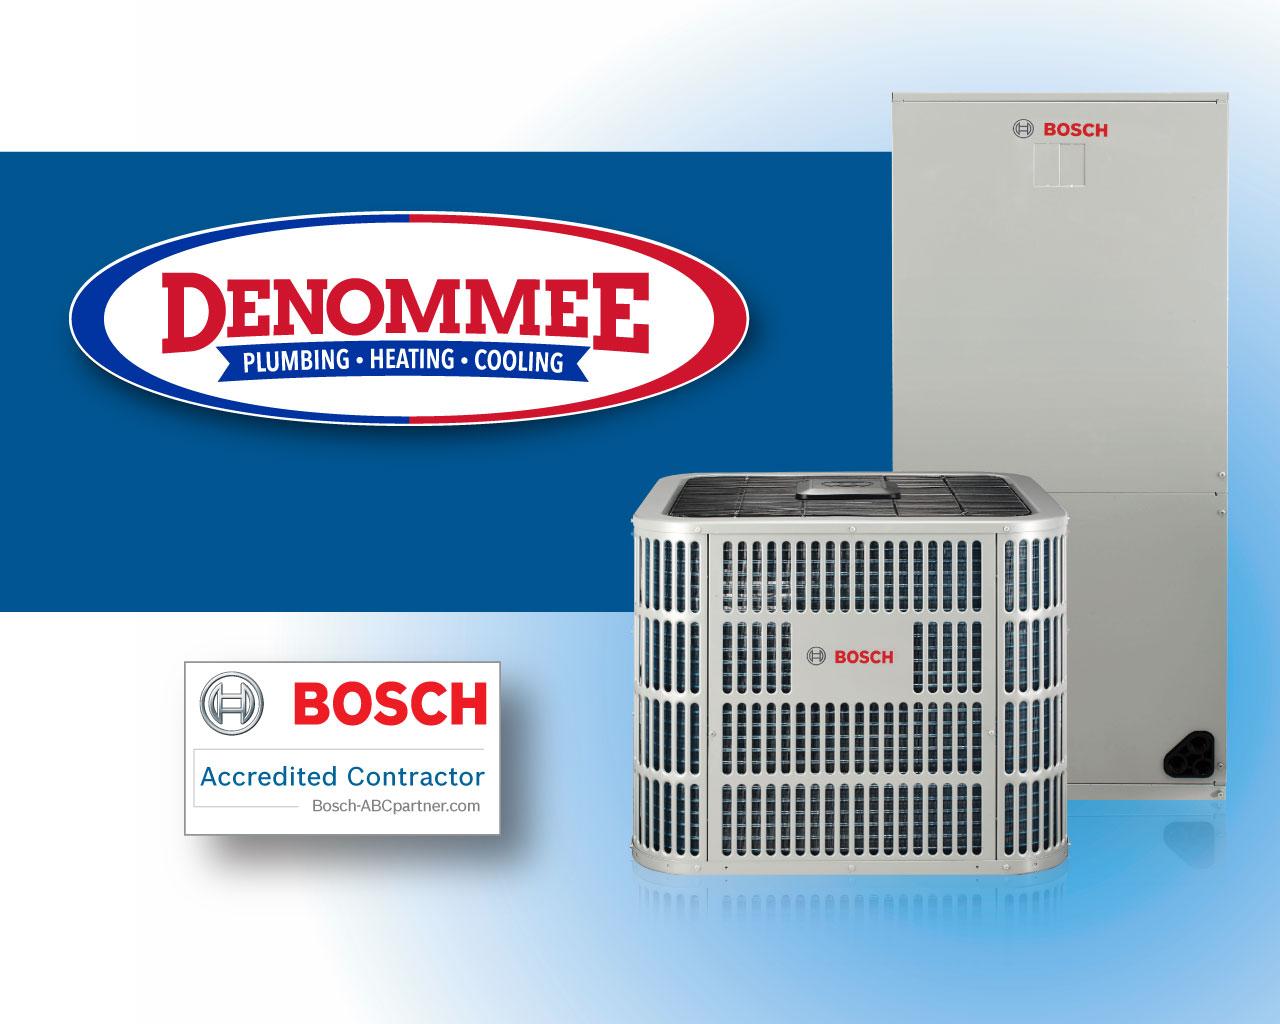 Denommee Plumbing, Heating & Cooling is an Accredited Bosch Contractor